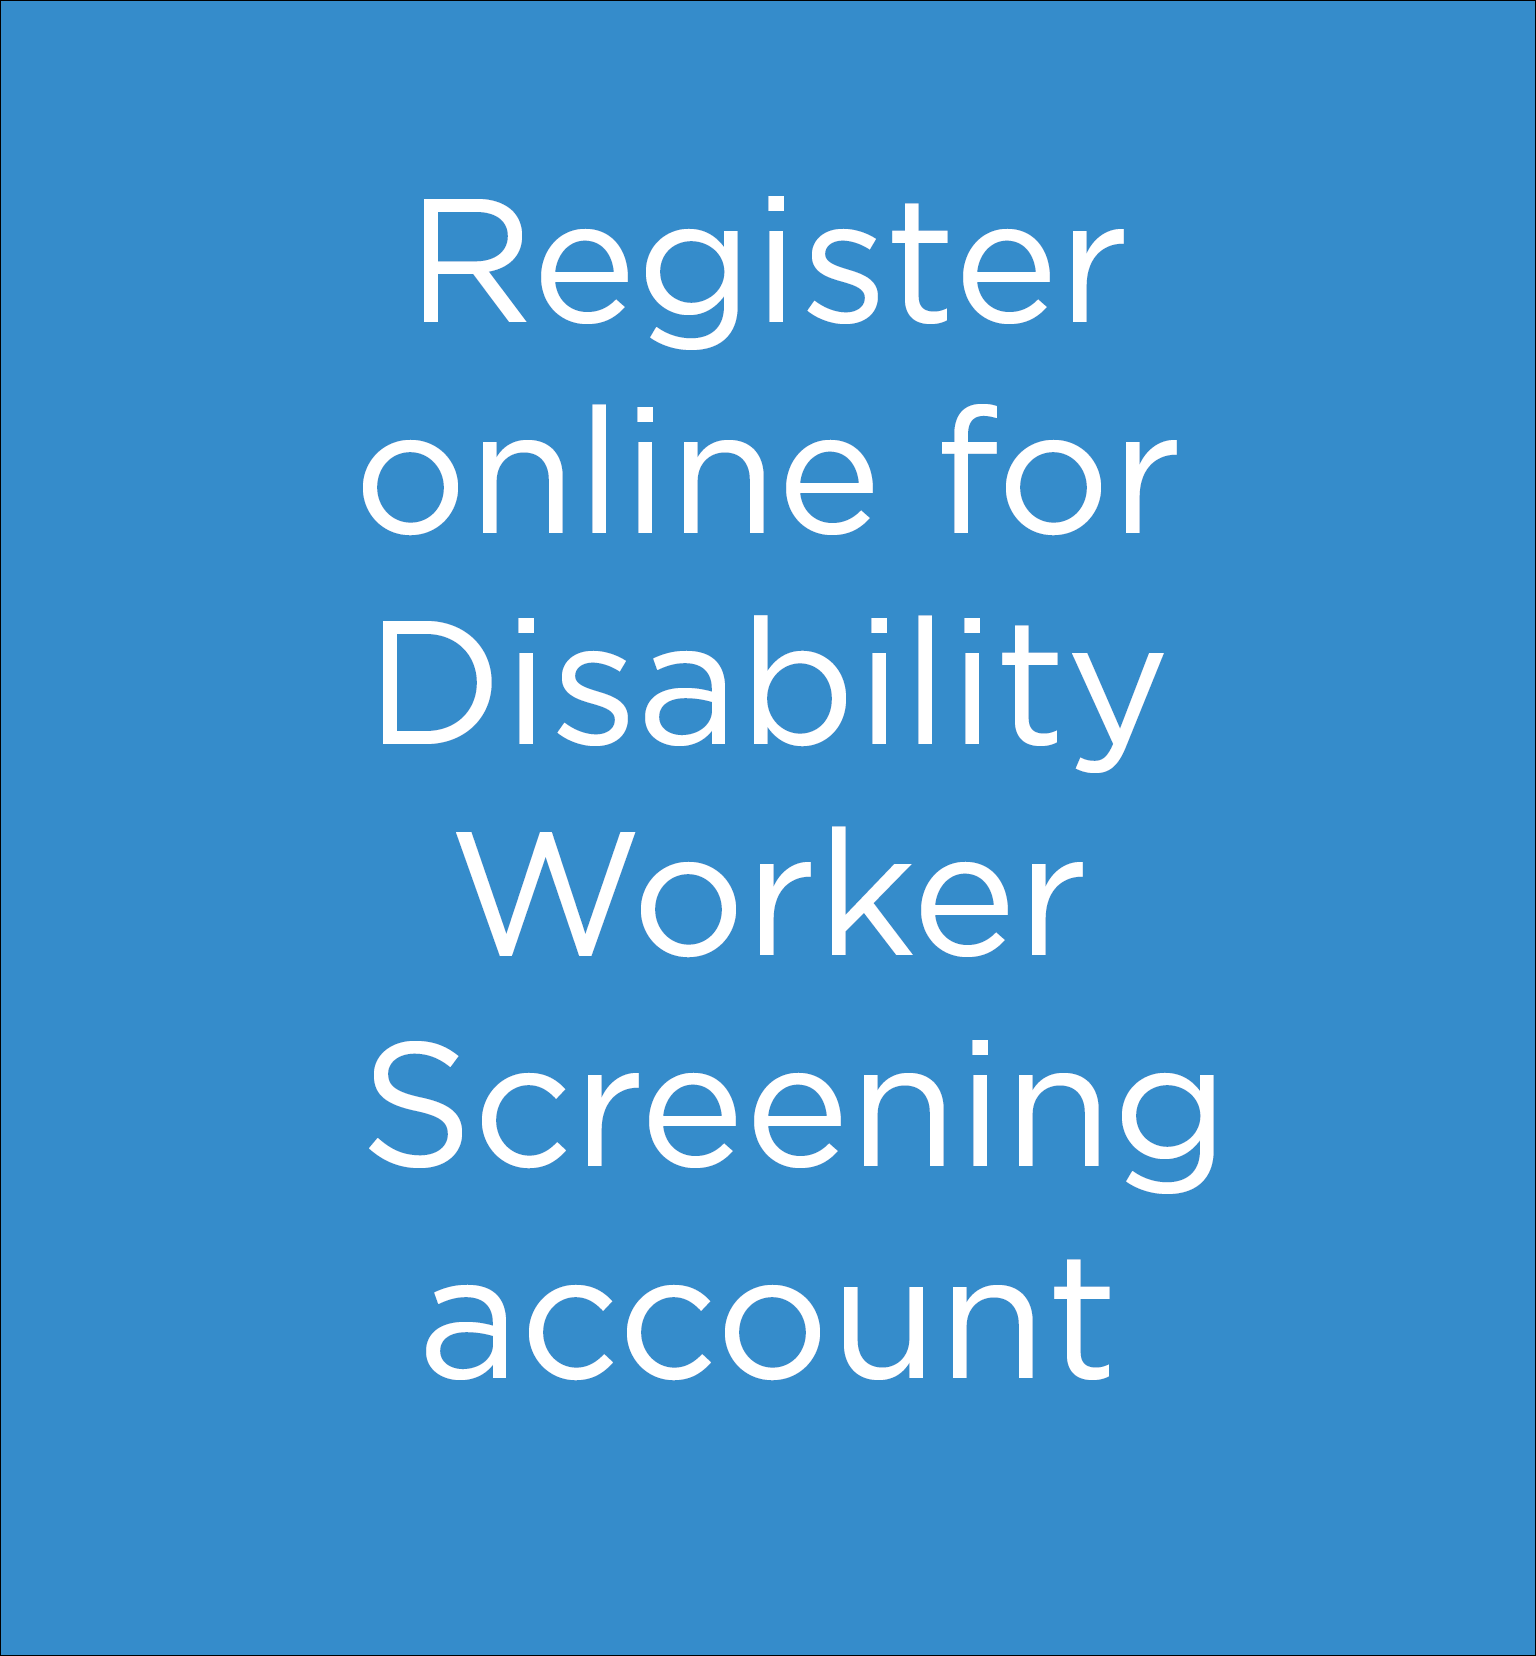 Register online for Disability Worker Screening account